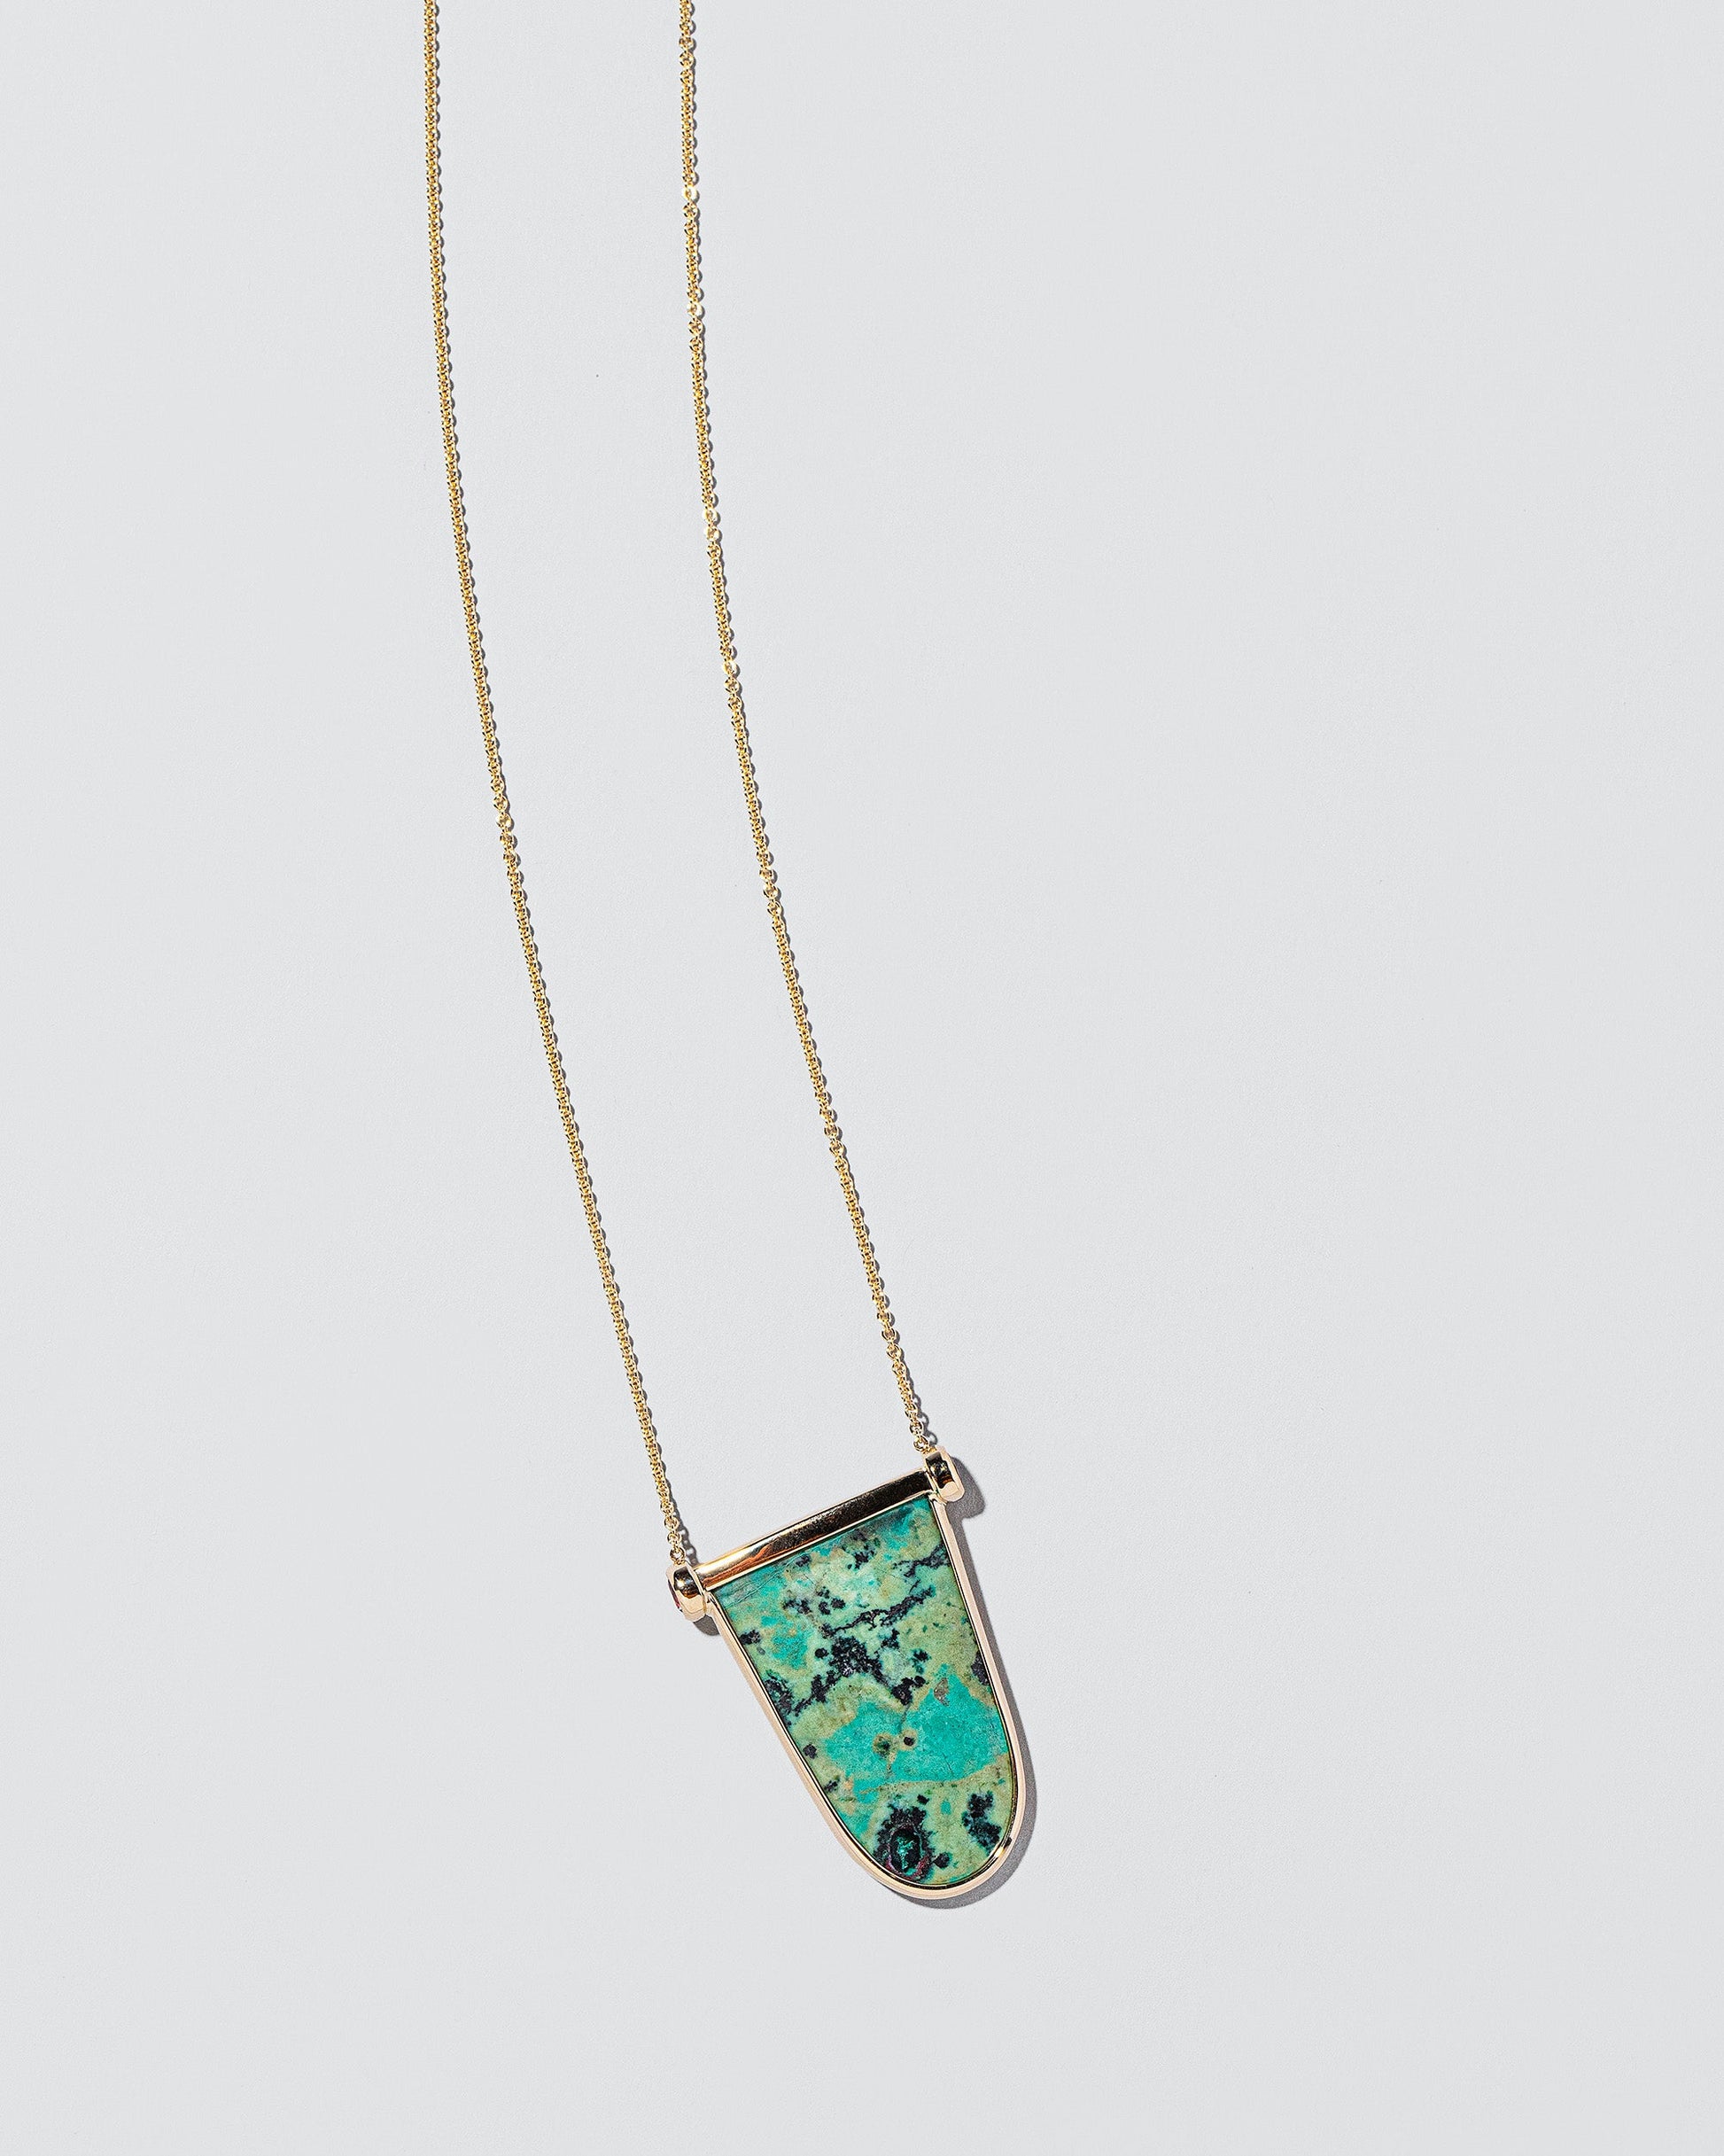  Chrysocolla Tongue Necklace on light color background.